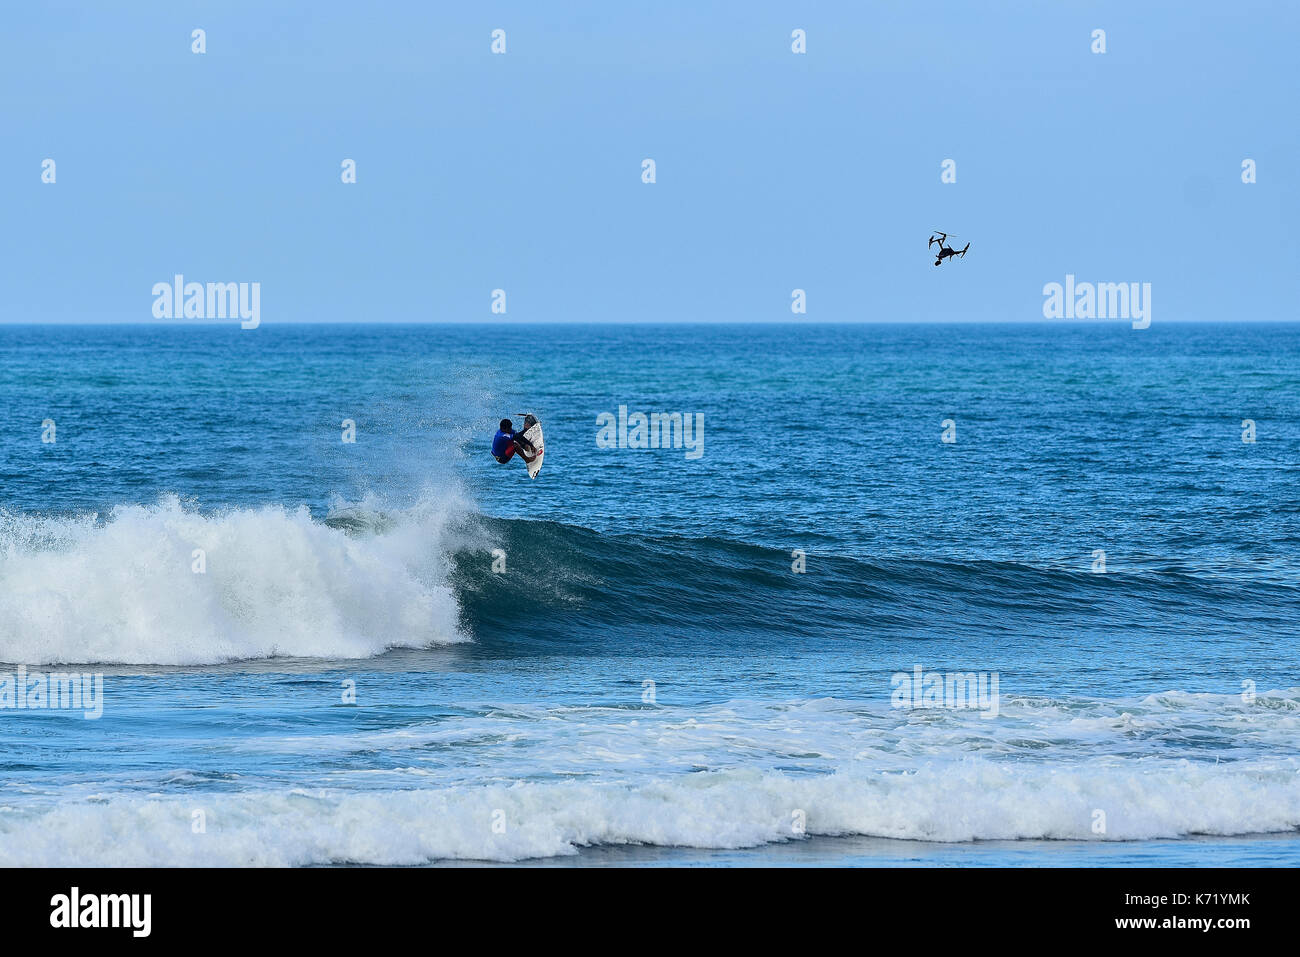 San Clemente, USA. 13 September, 2017.  Surfers compete head to head during the 2017 Hurley Pro surf contest at Lower Trestles, San Onofre State Park, CA. Surfer: Italo Ferreira (BRA). Credit: Benjamin Ginsberg/Alamy Live News. Stock Photo